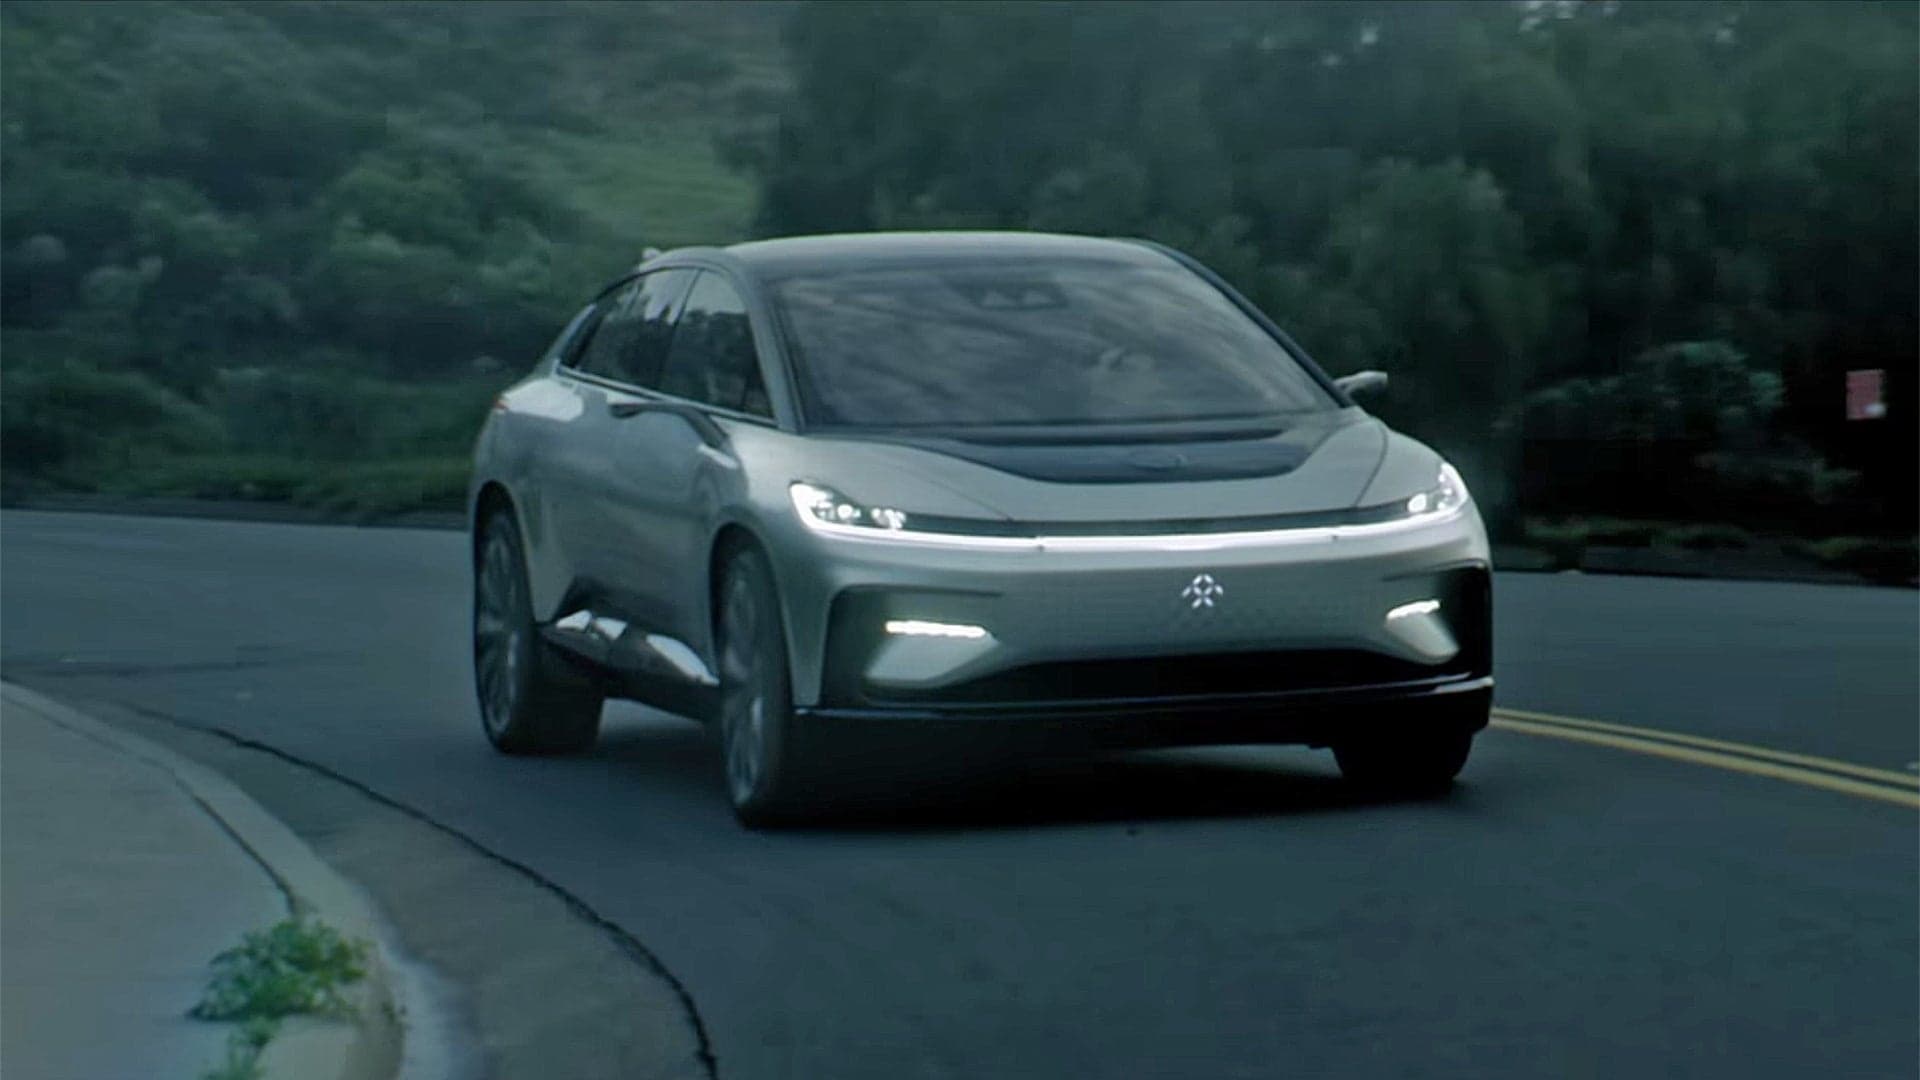 Faraday Future Forced to Sell Its Own Headquarters, Assets to Stay Afloat: Report